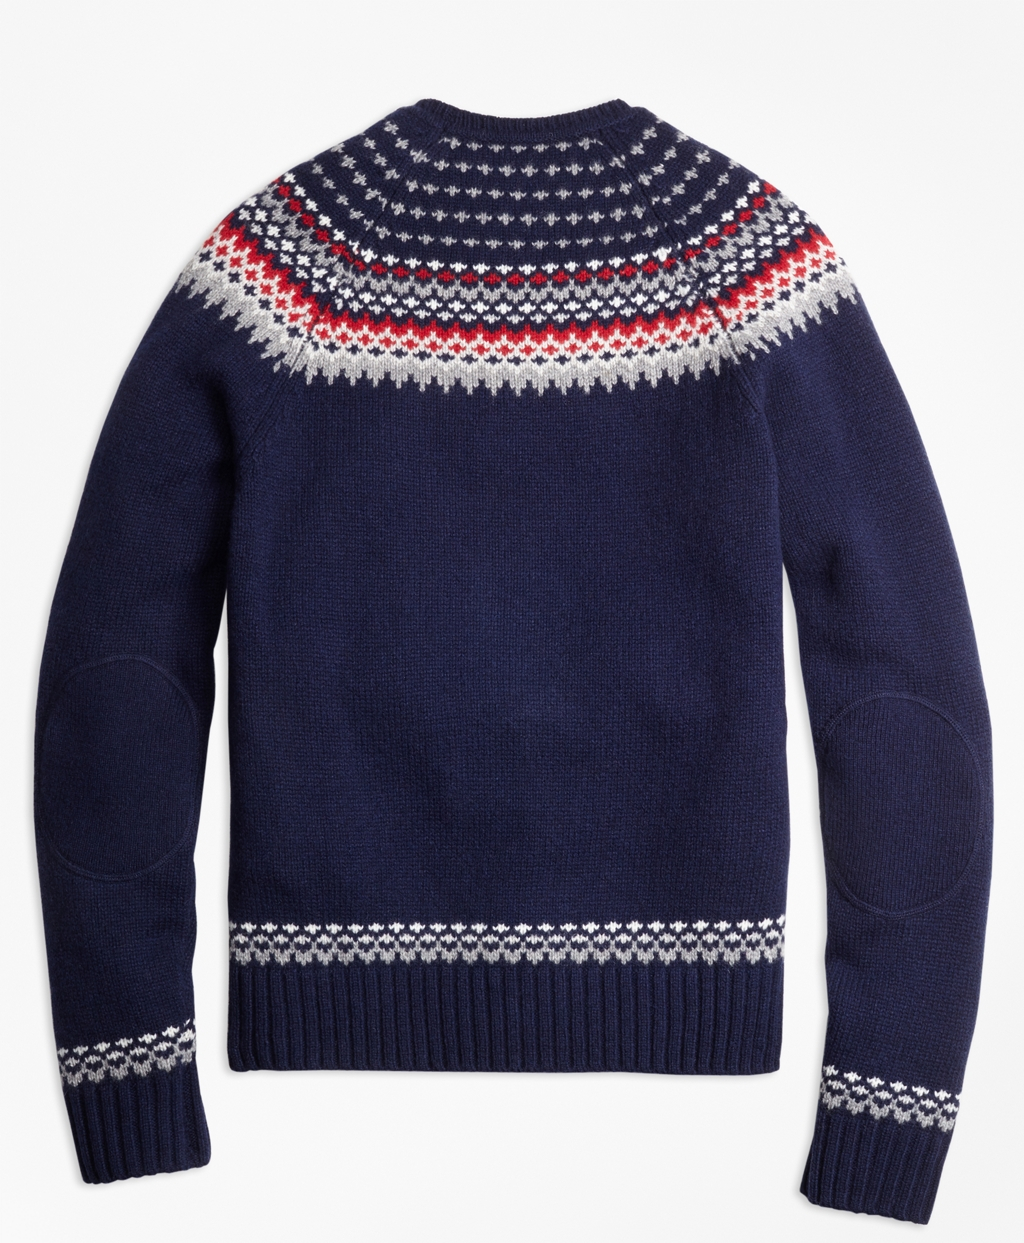 Lyst - Brooks Brothers Nordic Fair Isle Crewneck Sweater in Blue for Men